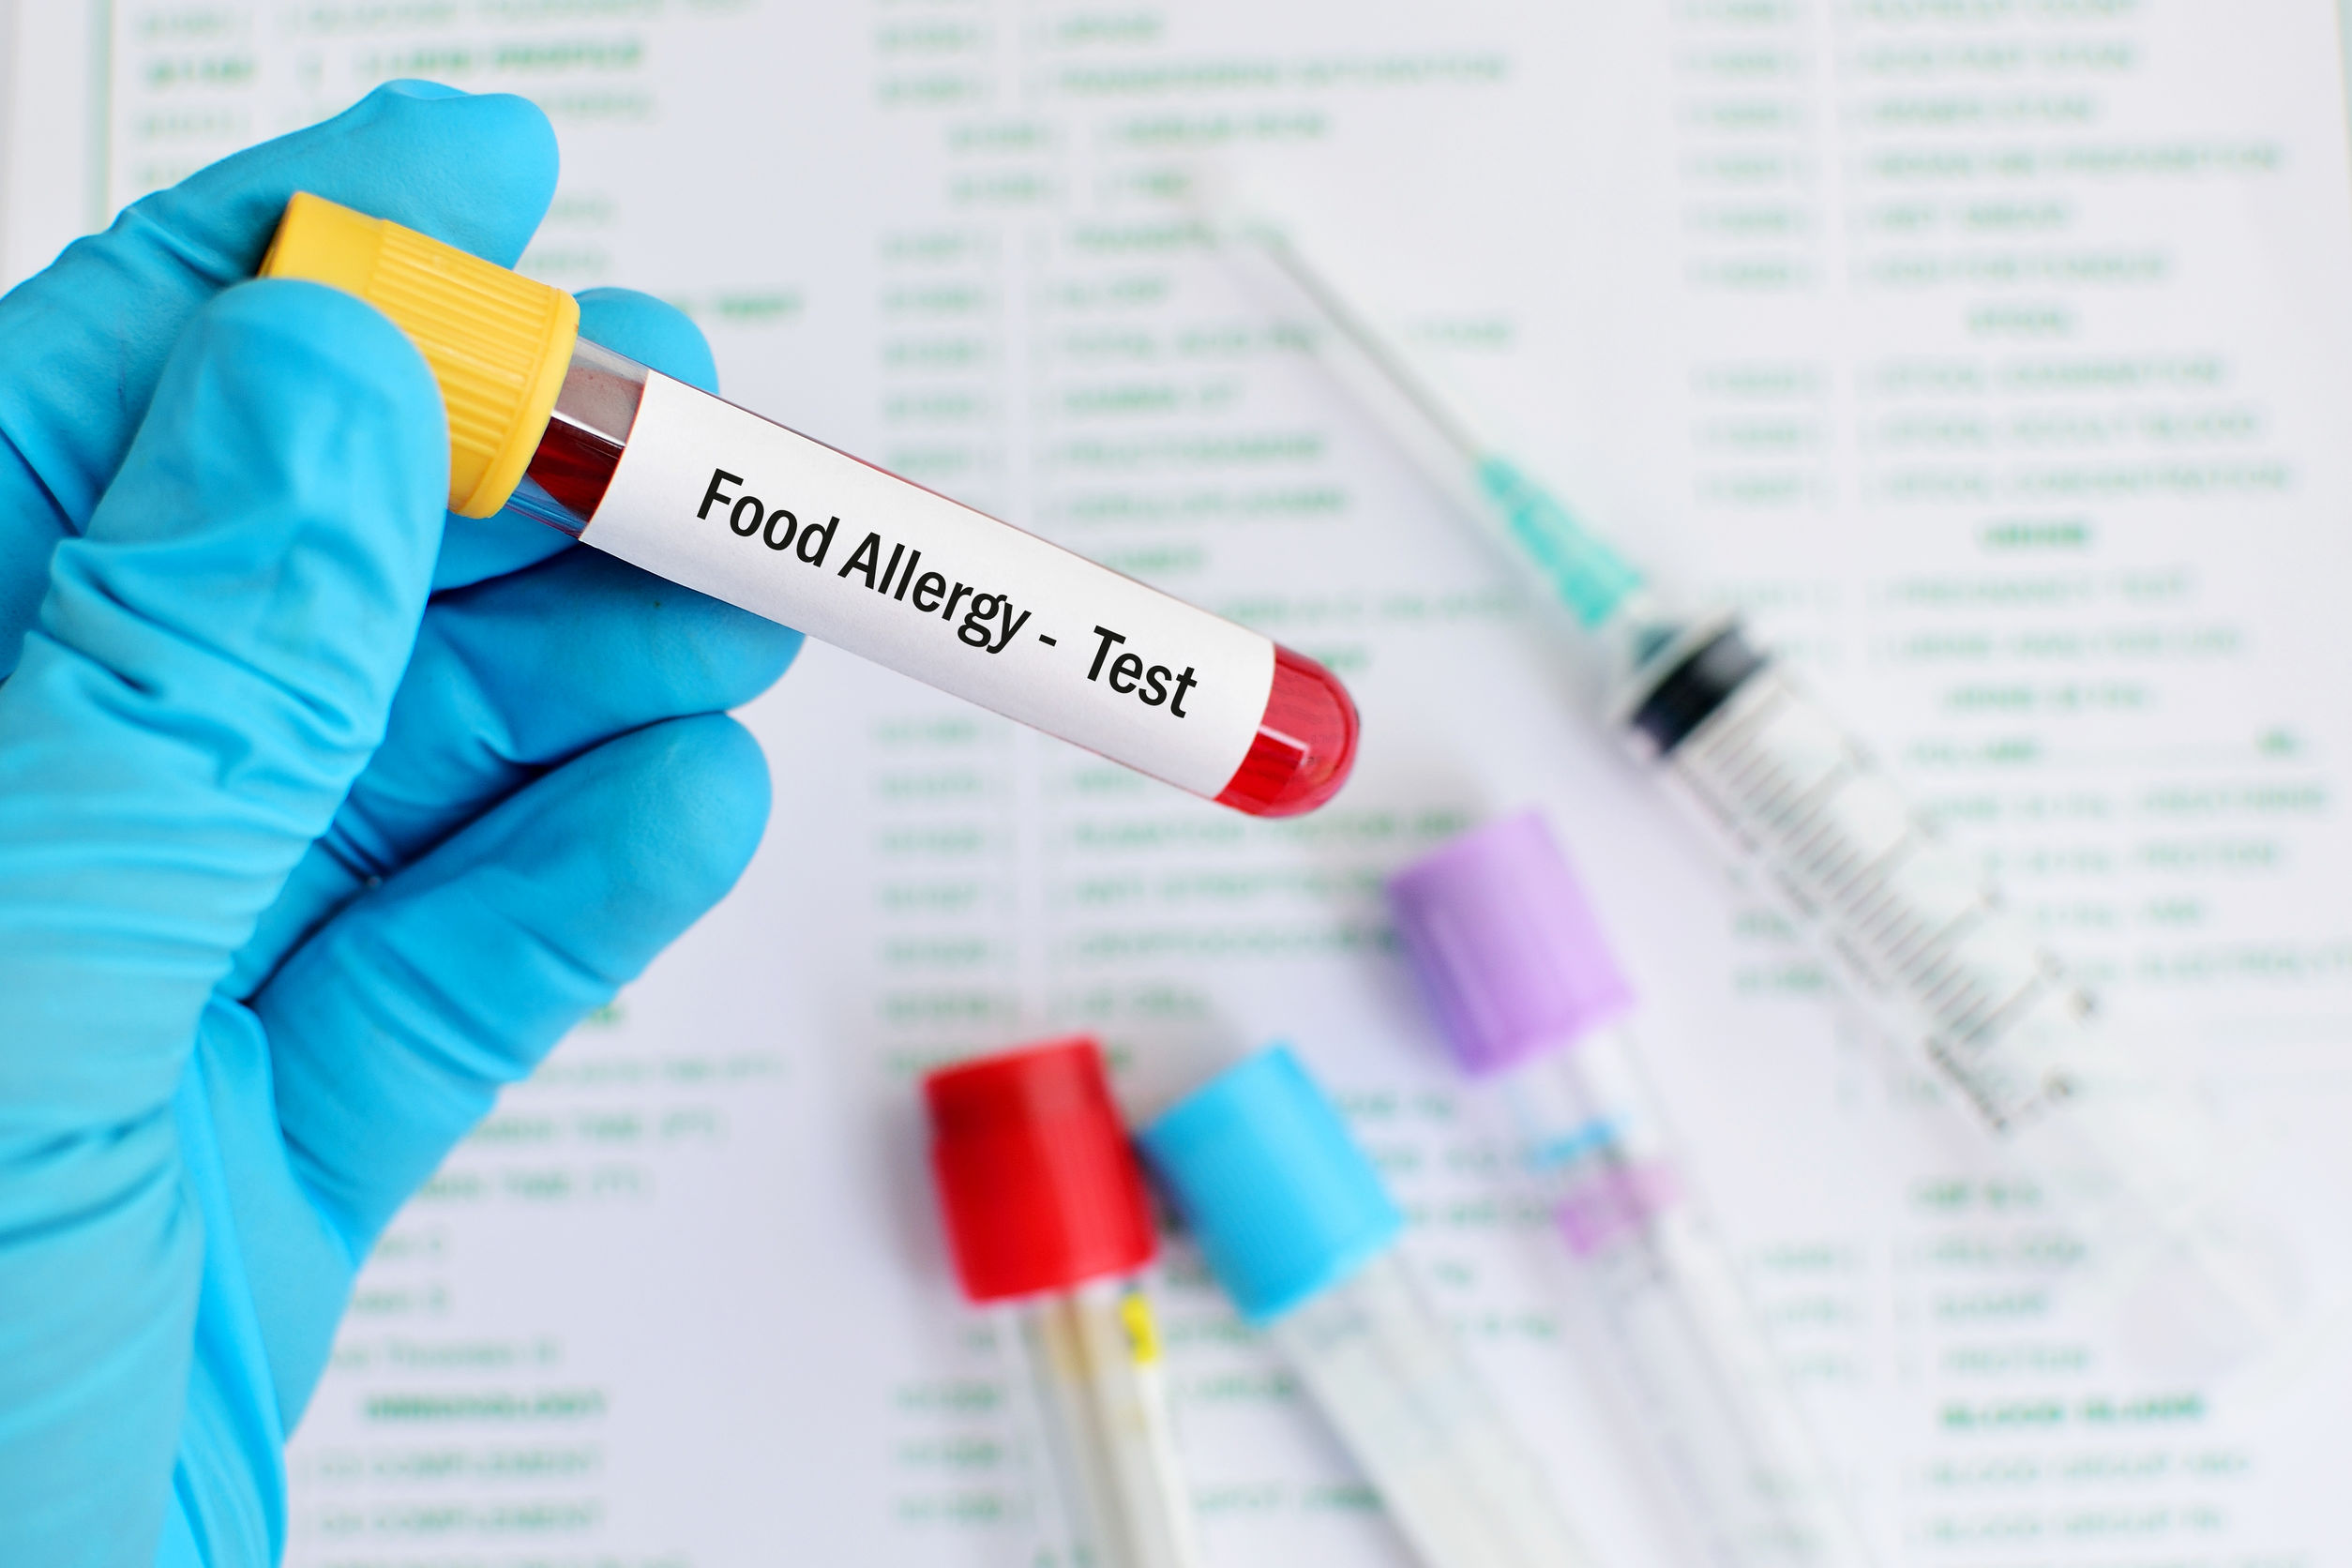 Blood for food allergy test